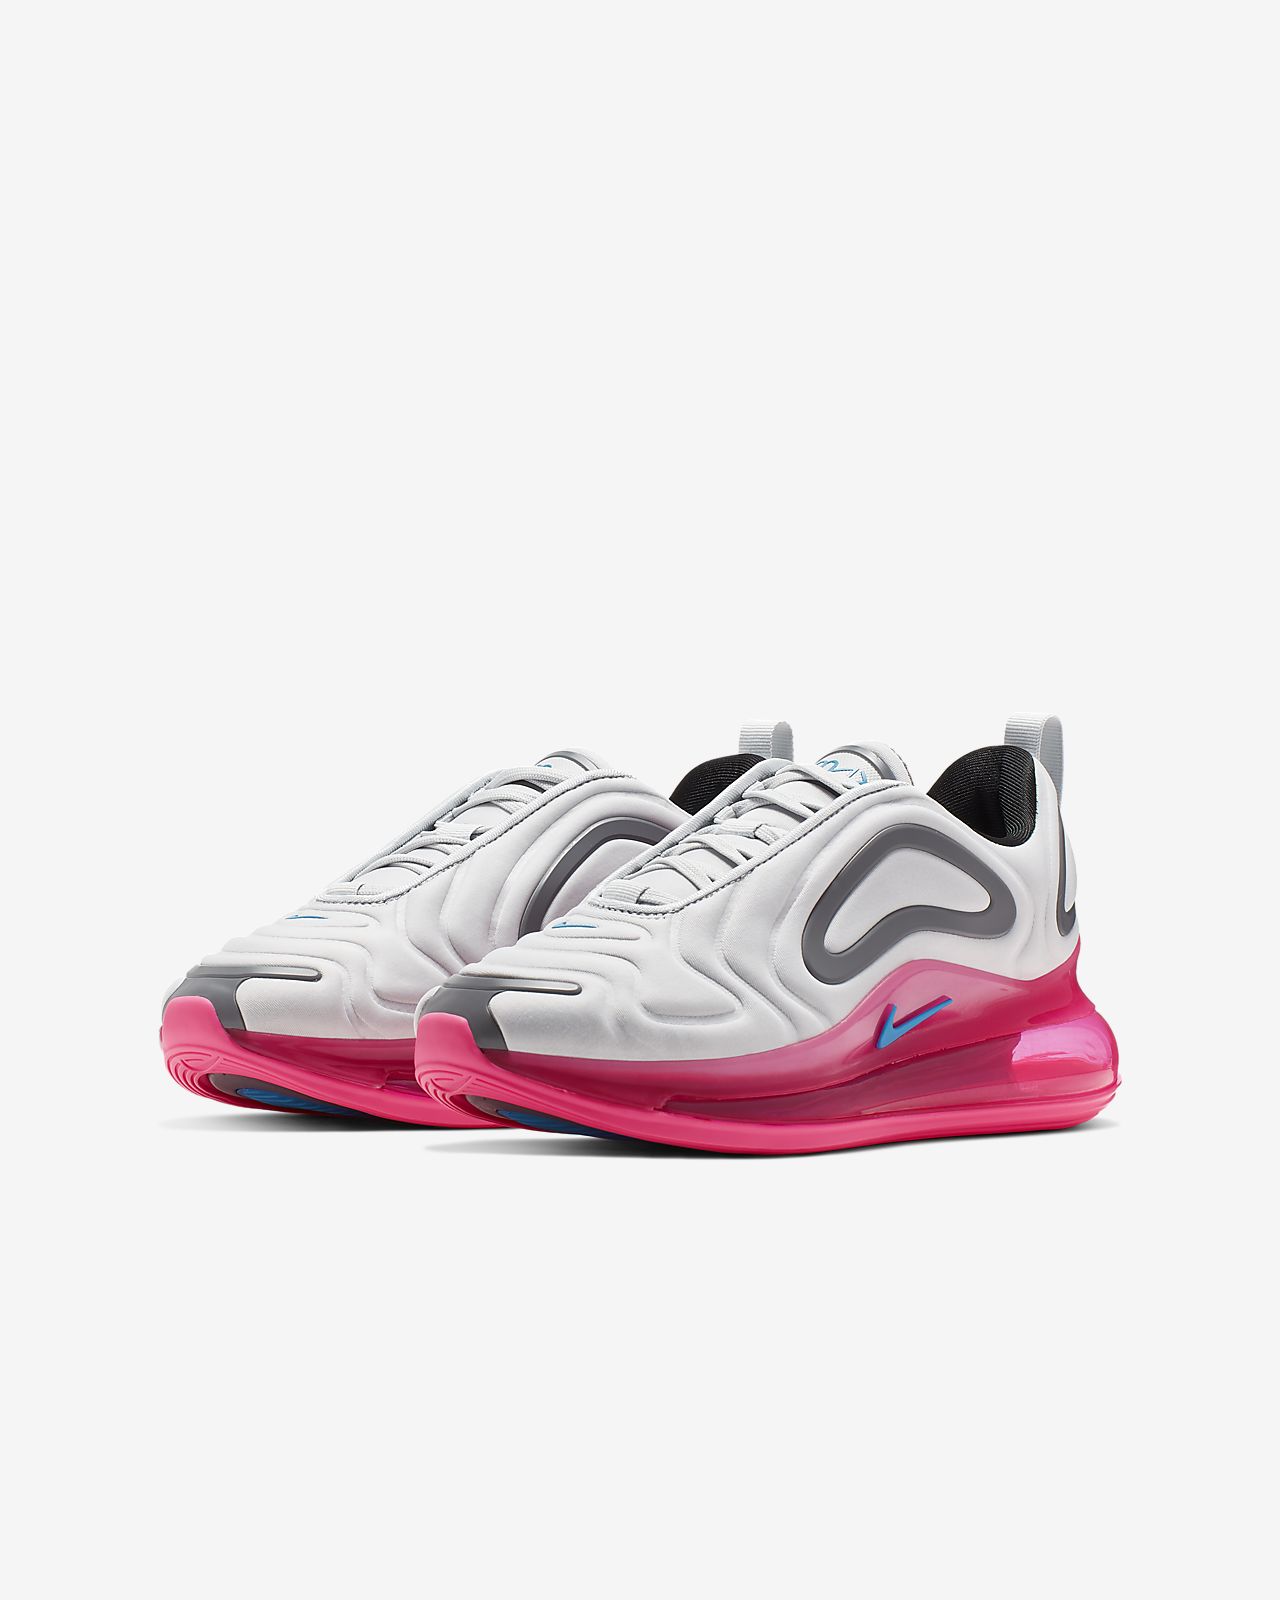 air max 720 baby off 60% - online-sms.in